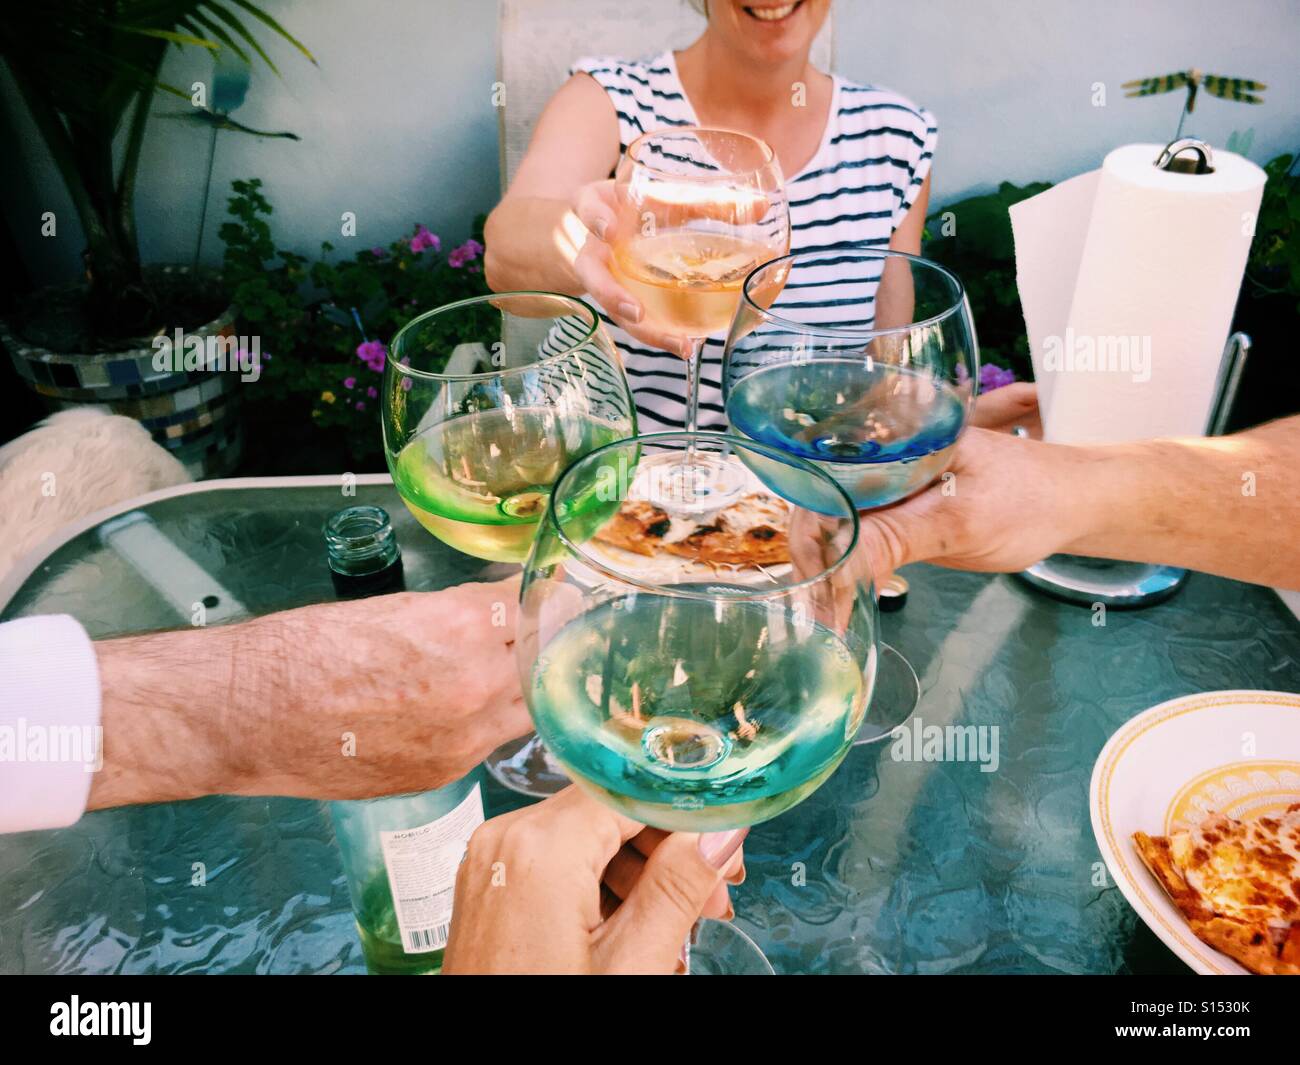 drinking-white-wine-with-pizza-outdoors-